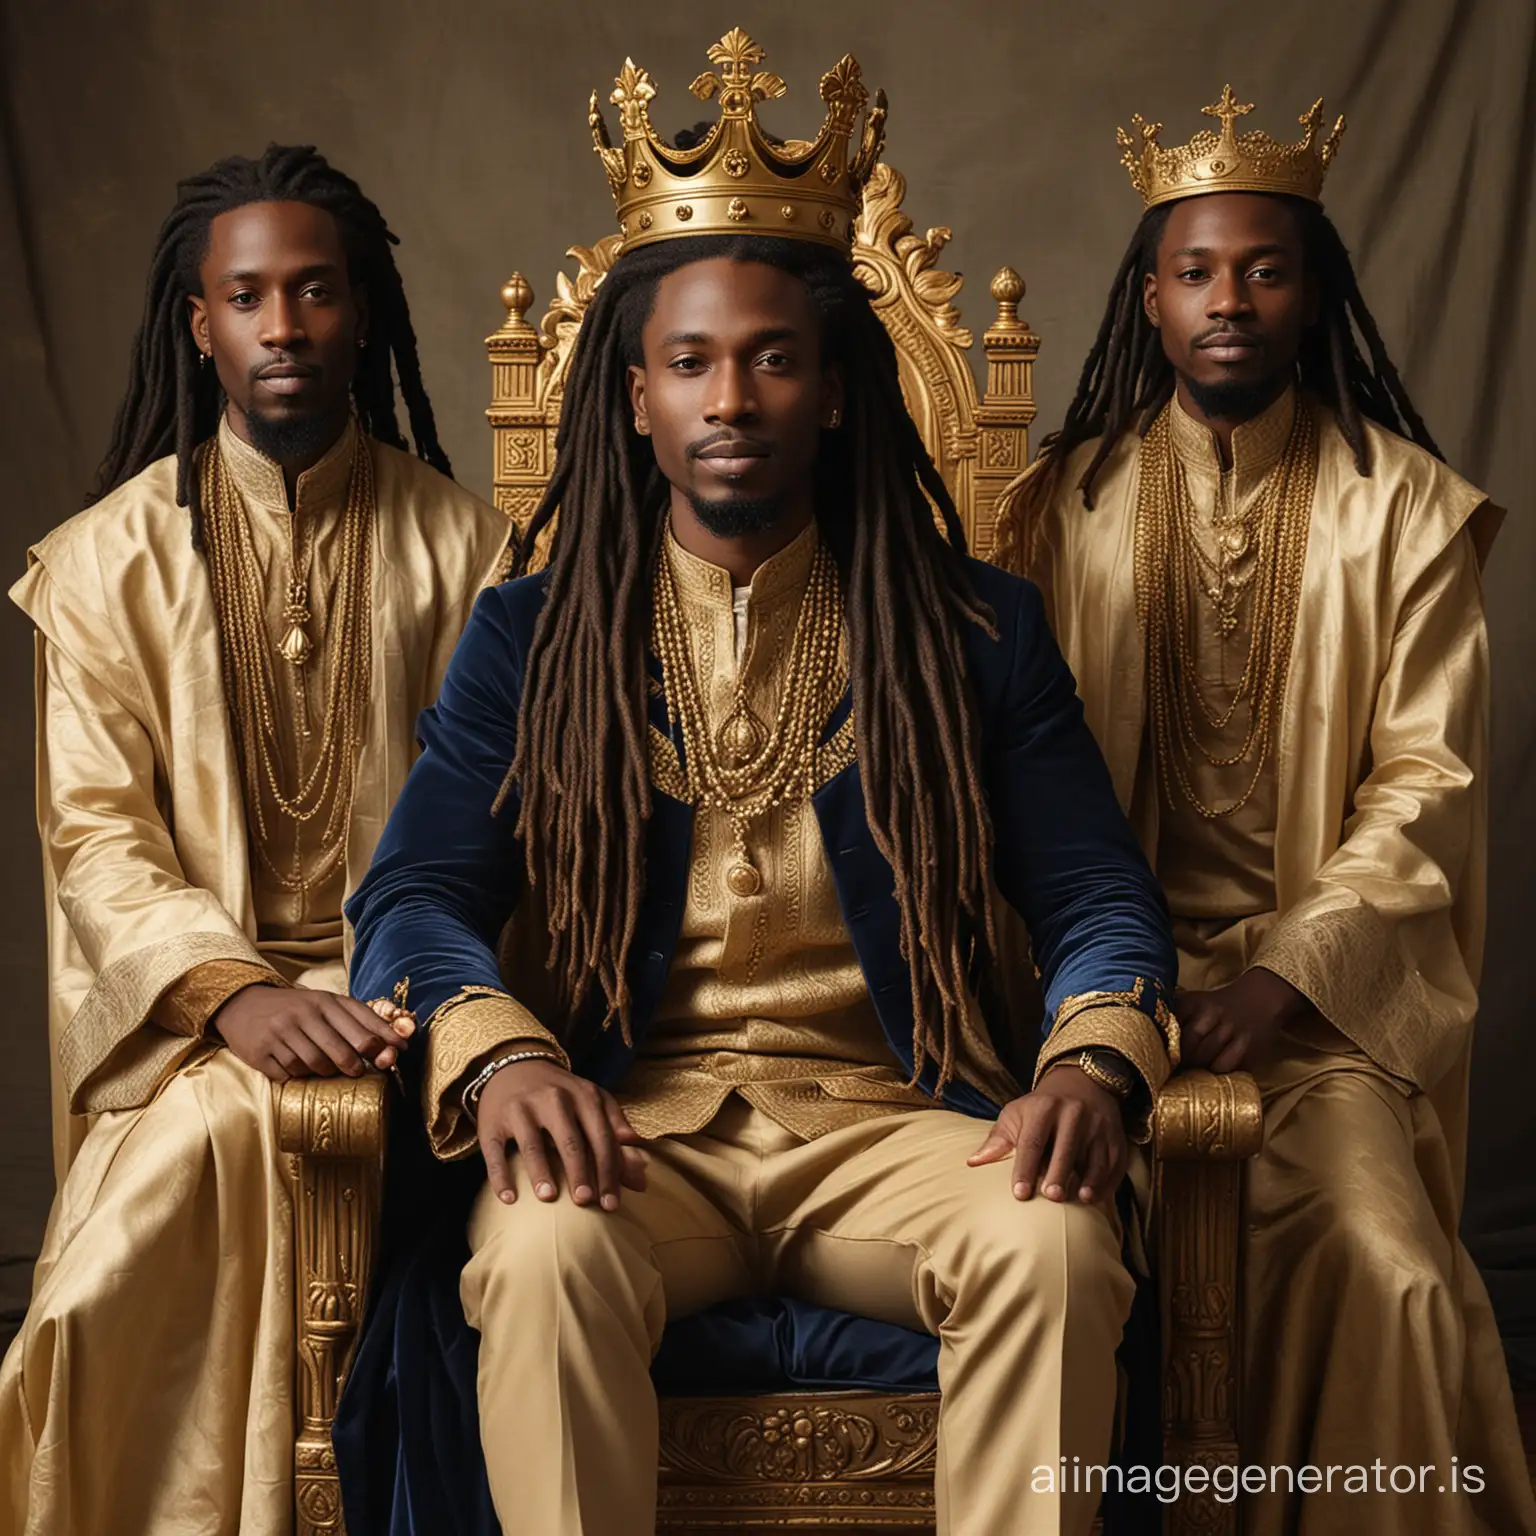 Create an image of a young African artist in his thirties with long dreadlocks, dressed in regal attire, sitting on a throne with a gold crown. Also, beside him are his two brothers, dressed in royal garments.